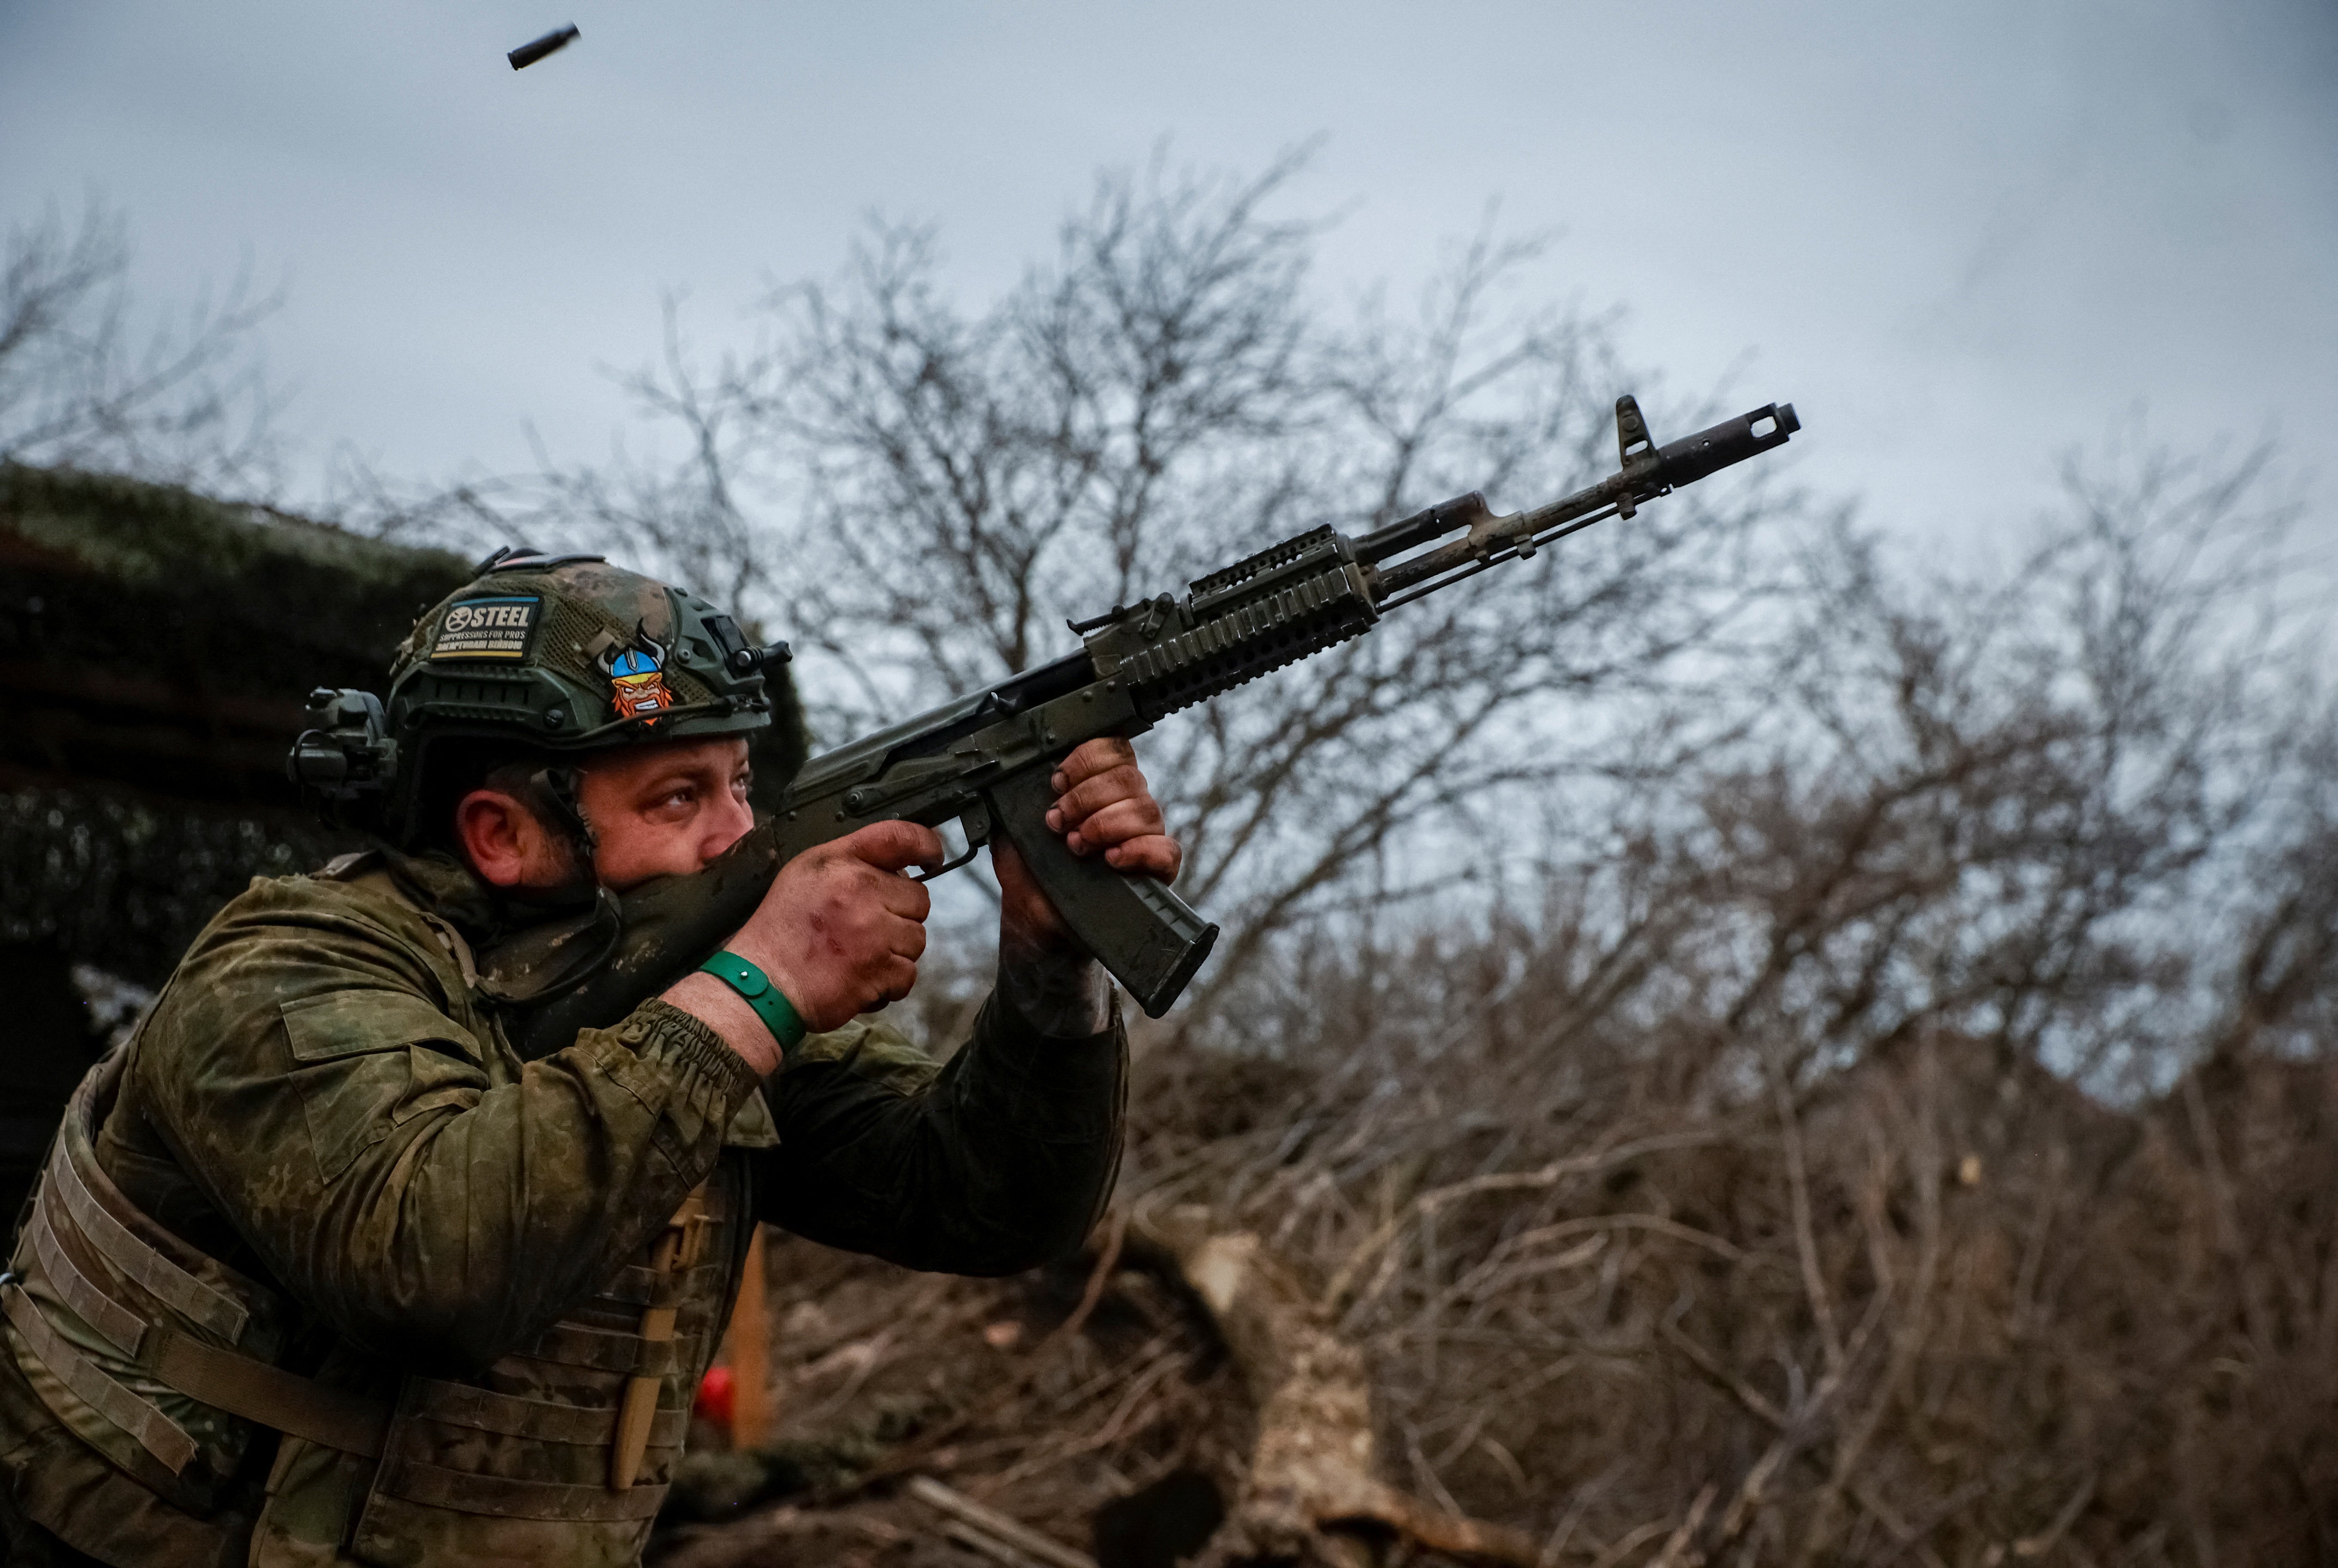 A Ukrainian serviceman from air defence unit of the 93rd Mechanized Brigade fires a AK-74 assault rifle on the eastern frontline near Bakhmut